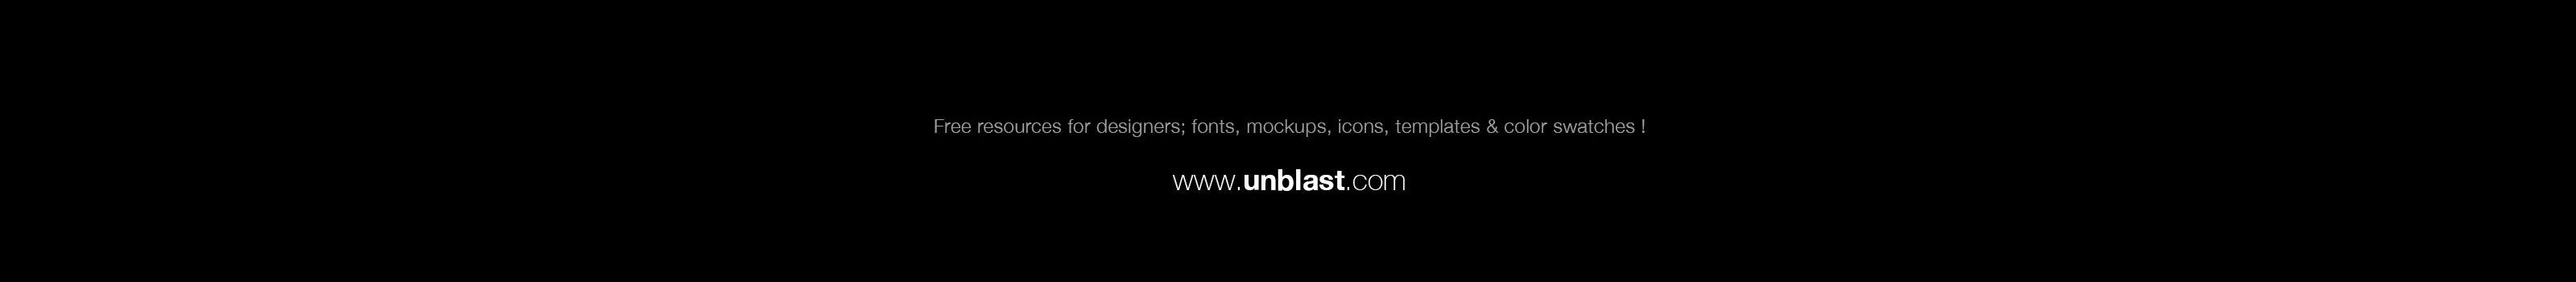 Unblast - Free Resources for Designers's profile banner